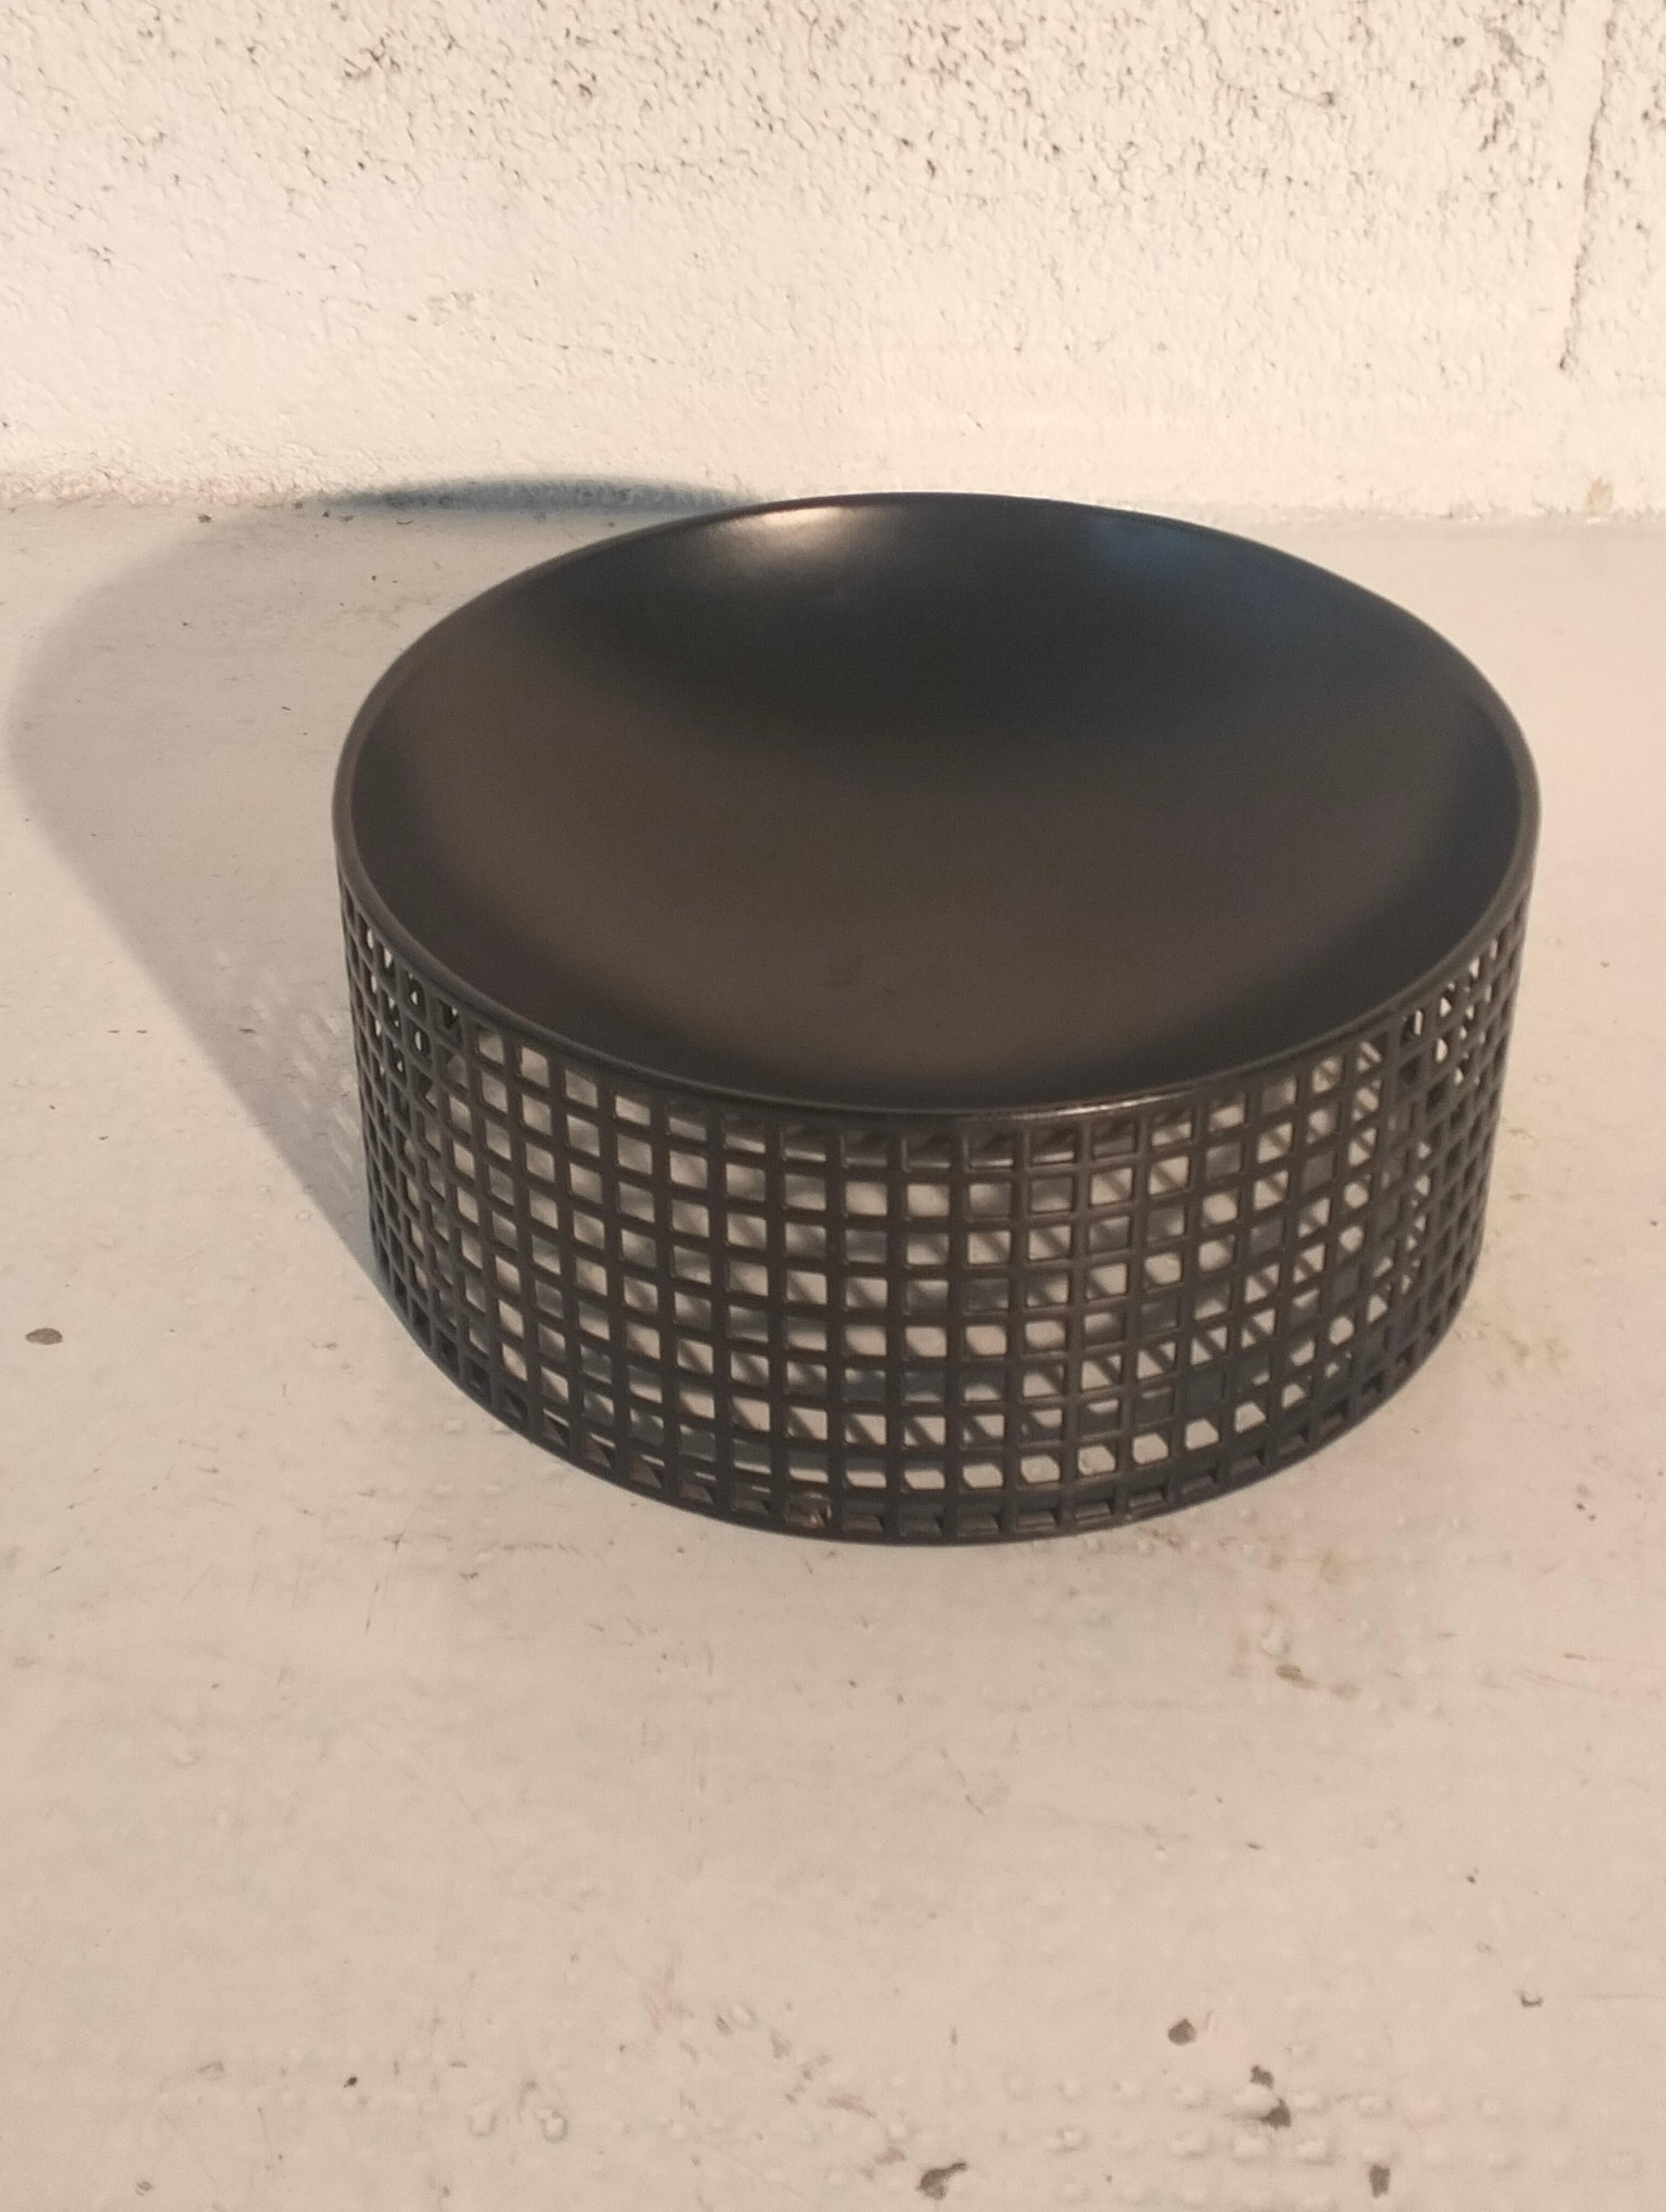 Josef Hoffmann (1870-1956) black fruit bowl / centerpiece / catchall for Bieffeplast, Italy circa 1980s. Modern Wiener Werkstätte design by Josef Hoffmann with perforated grid structure supporting a concave solid bowl. The bowl was originally